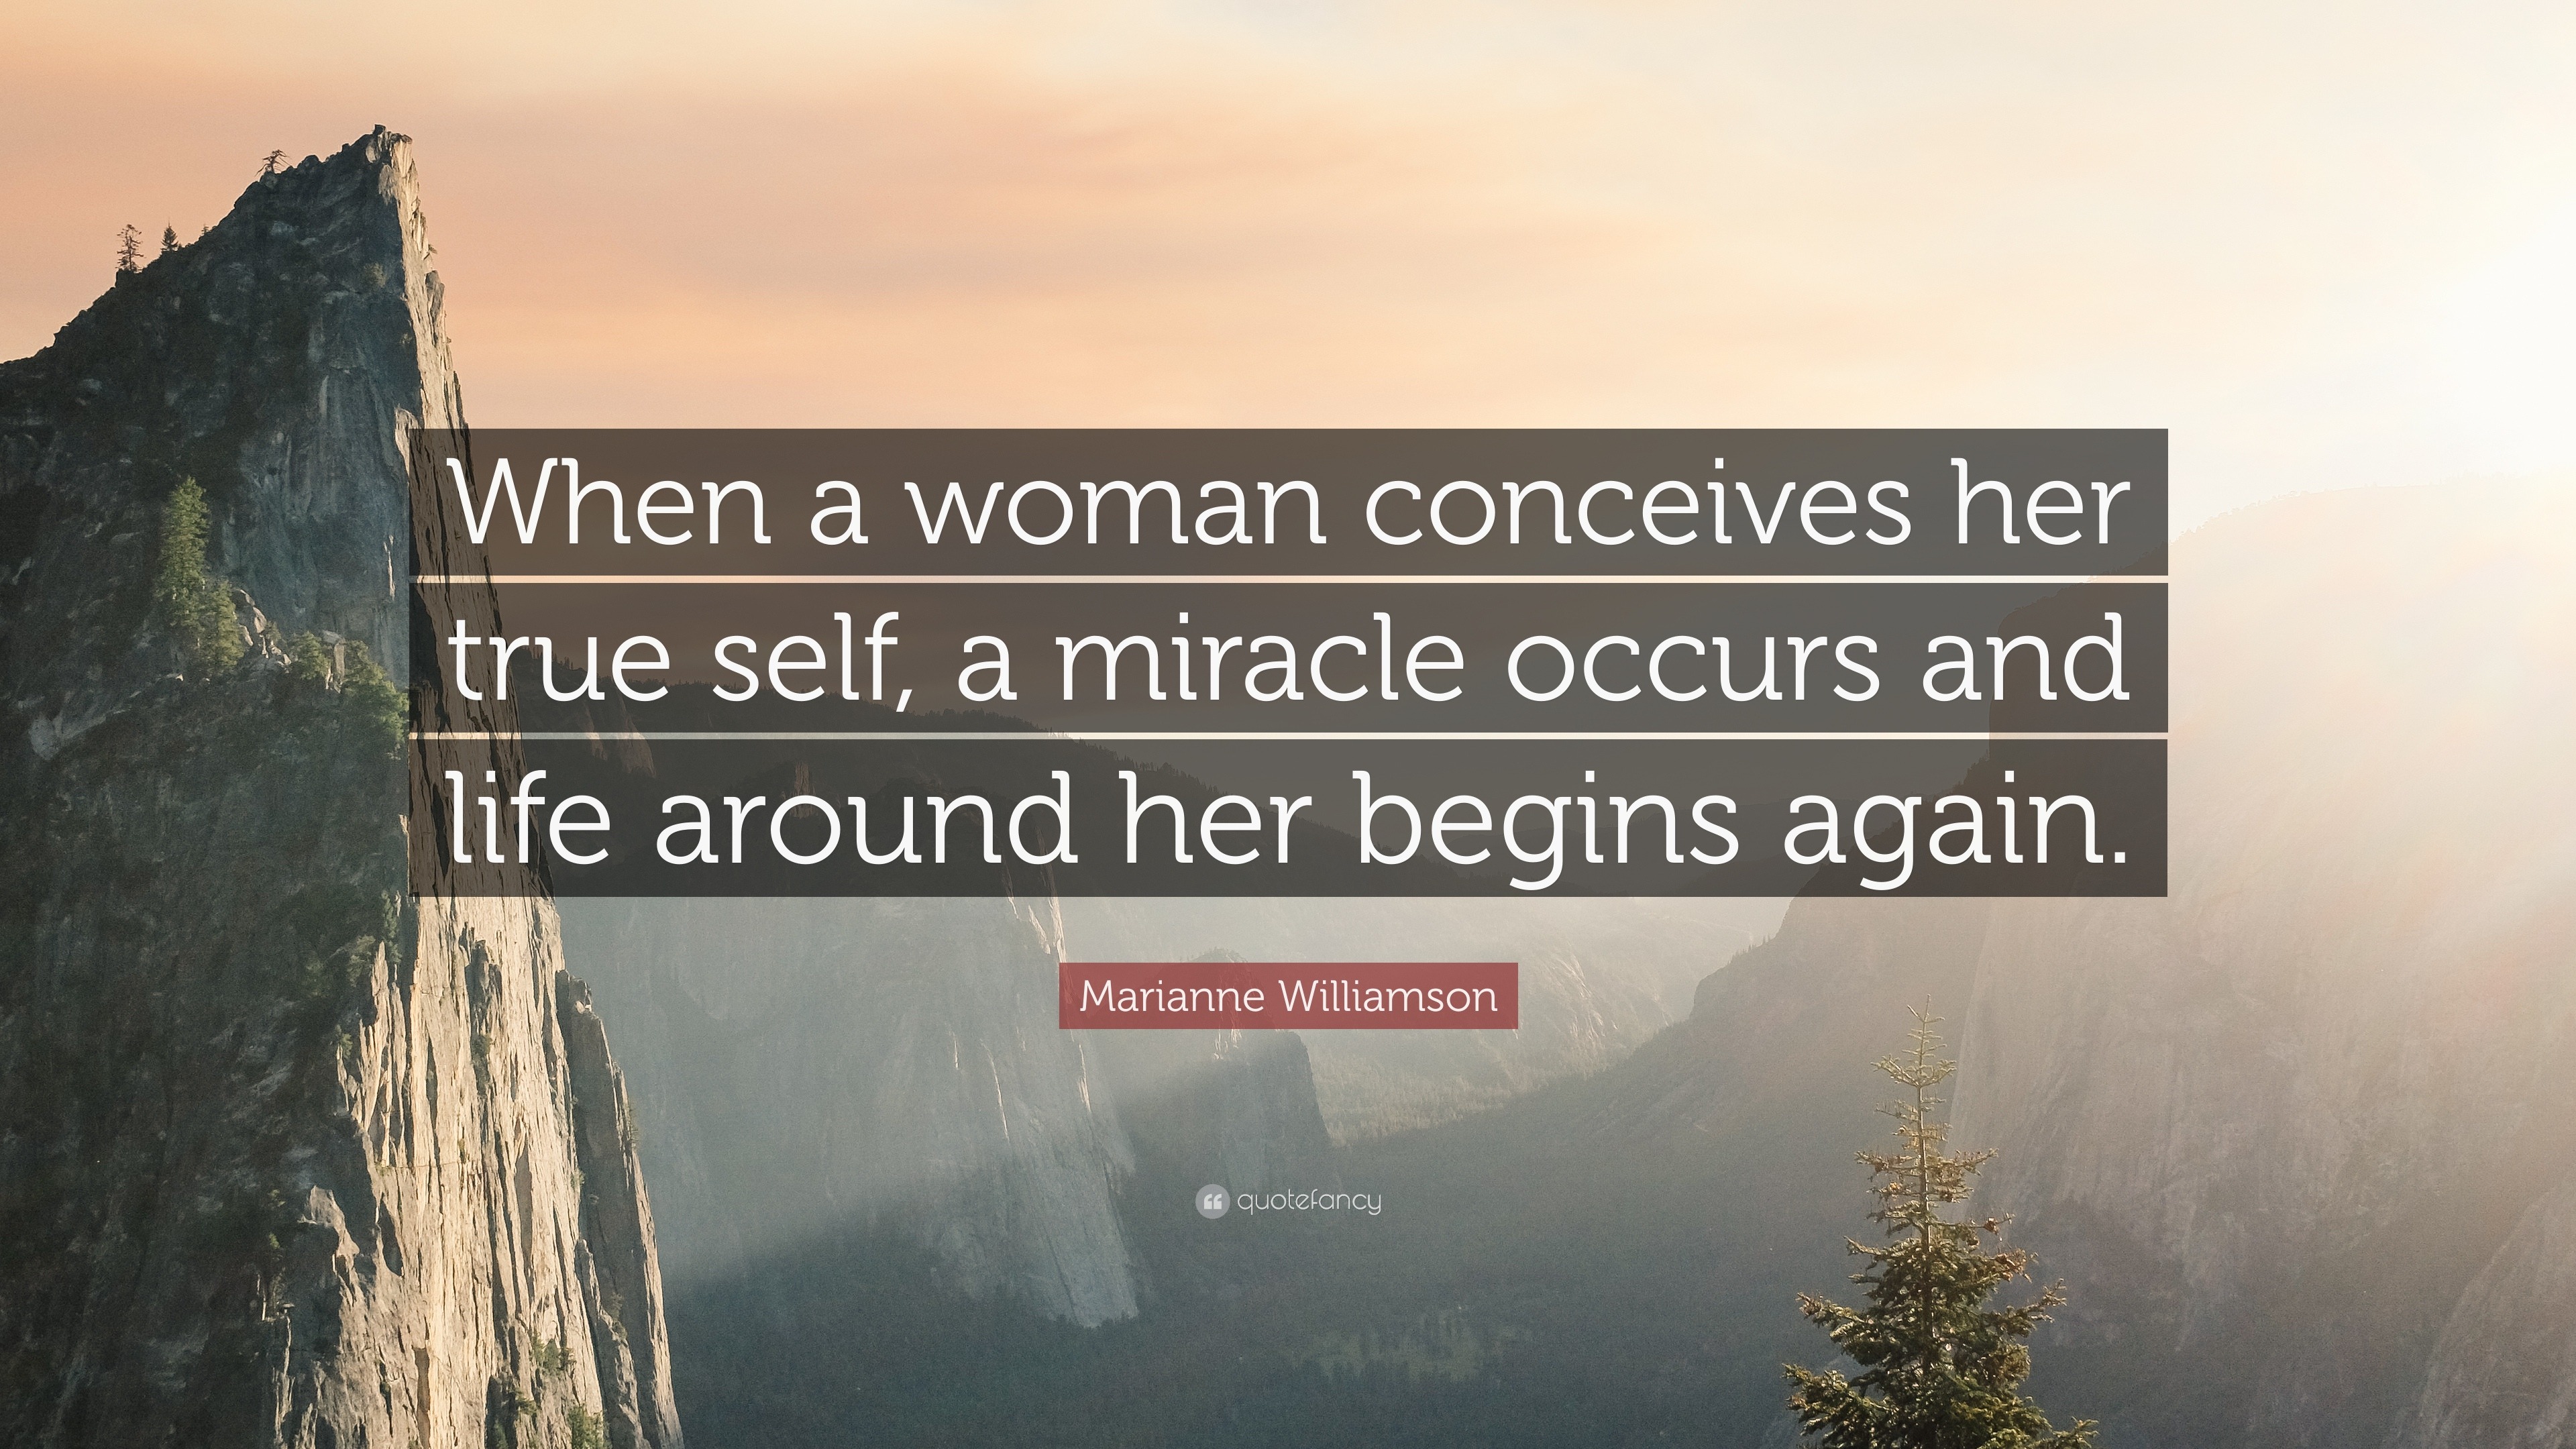 Marianne Williamson Quote: “When a woman conceives her true self, a ...